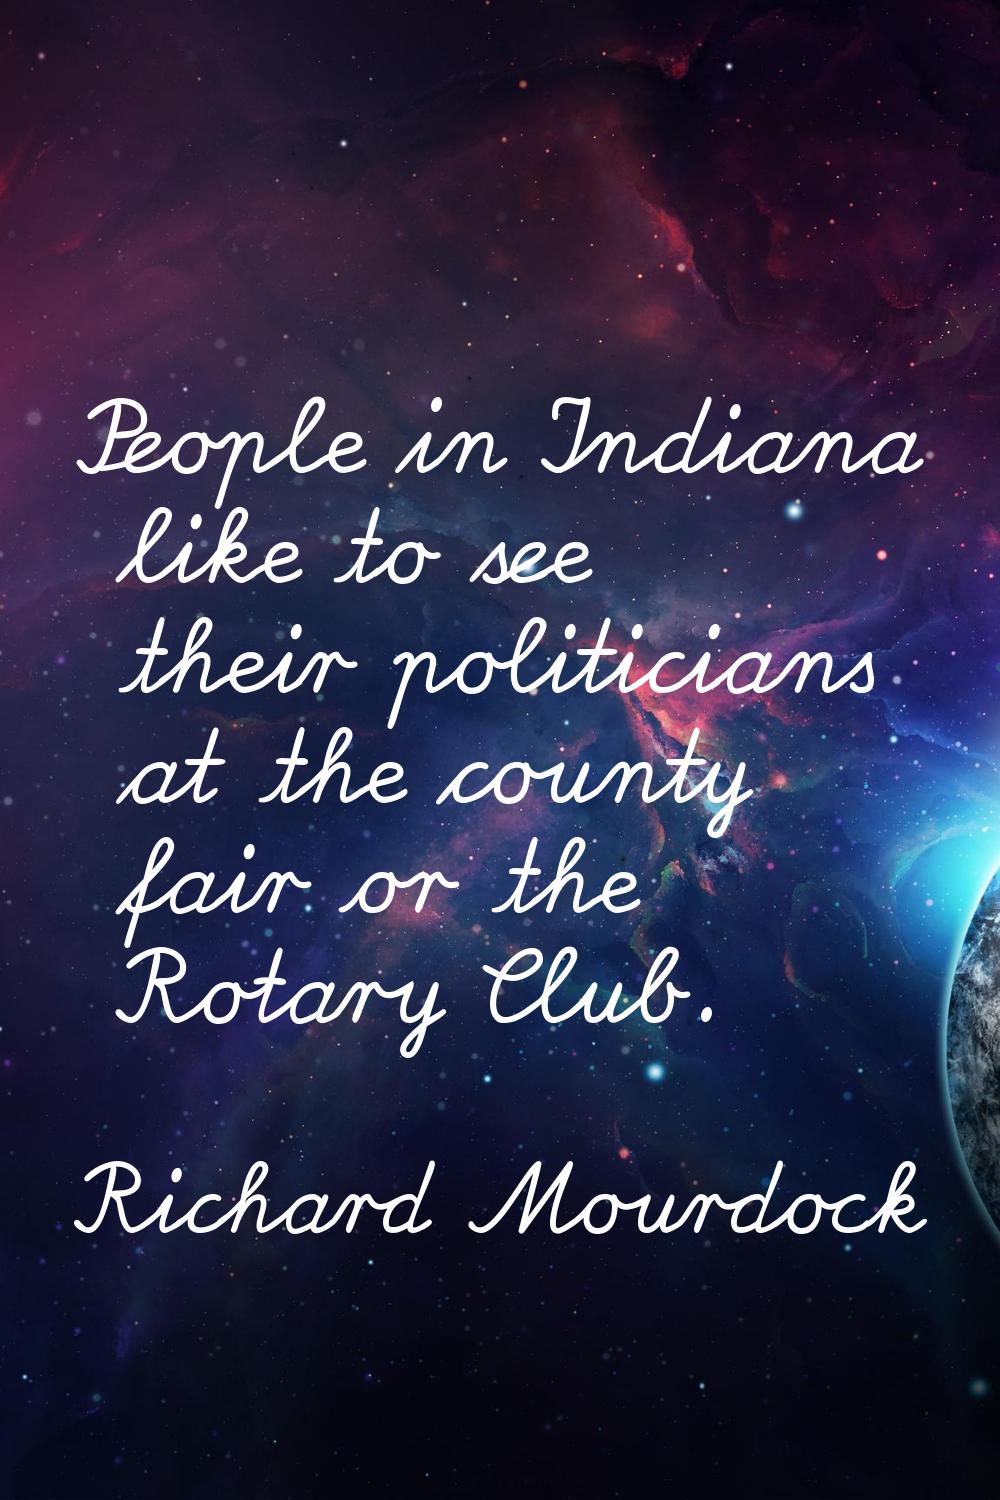 People in Indiana like to see their politicians at the county fair or the Rotary Club.